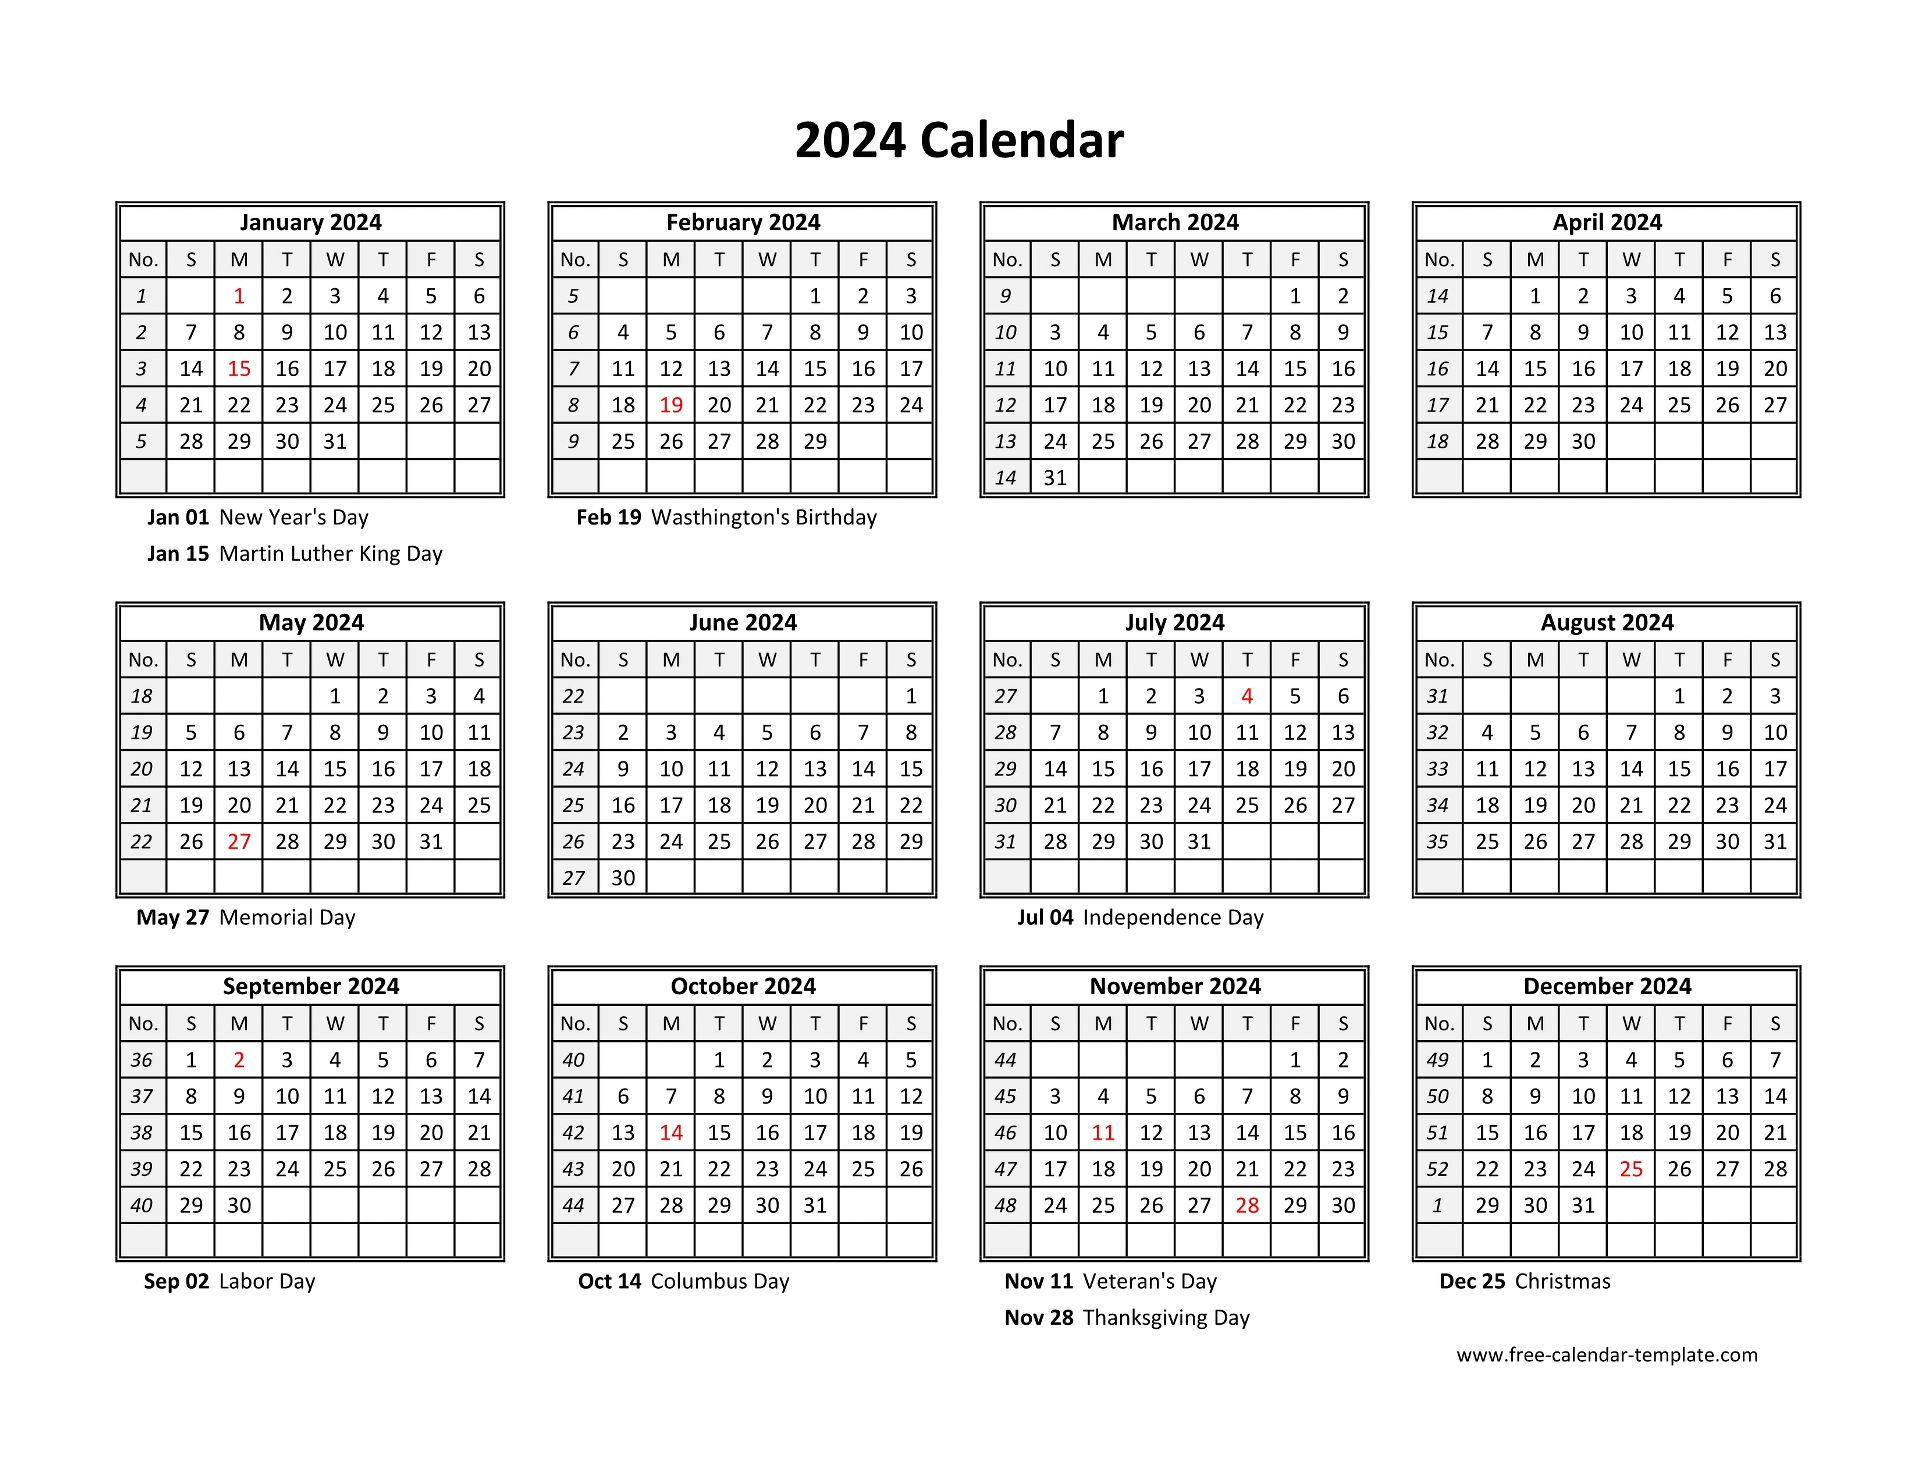 Yearly Calendar 2024 Printable With Federal Holidays | Free | Printable 2024 Calendars Without Installing